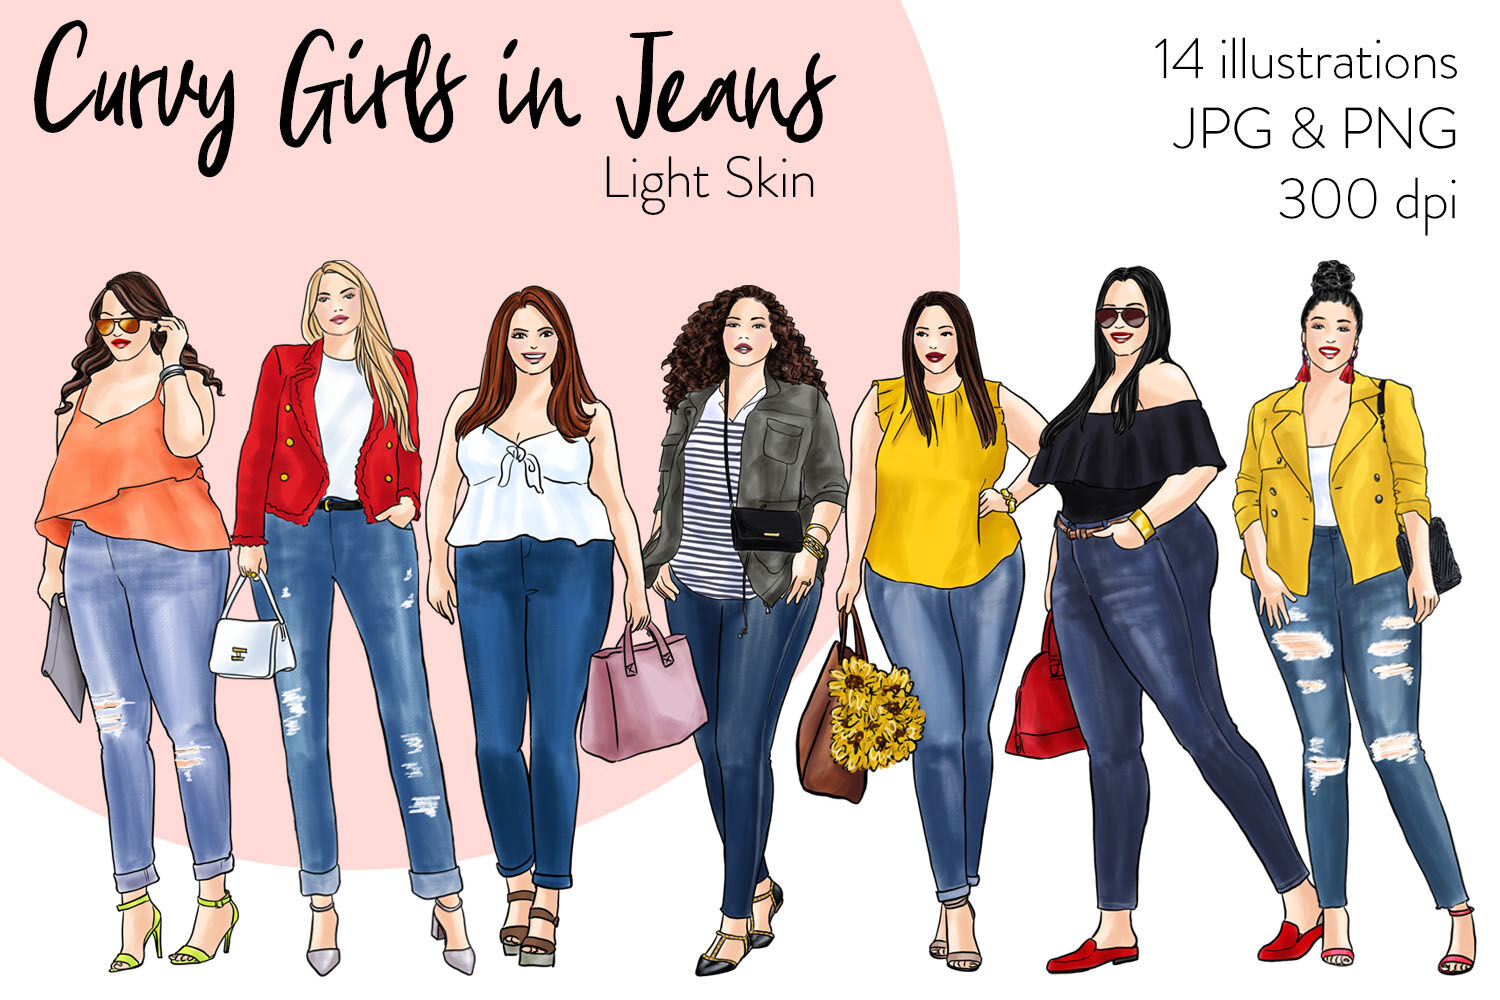 Download Watercolor Fashion Clipart Curvy Girls In Jeans Light Skin By Parinaz Wadia Design Thehungryjpeg Com